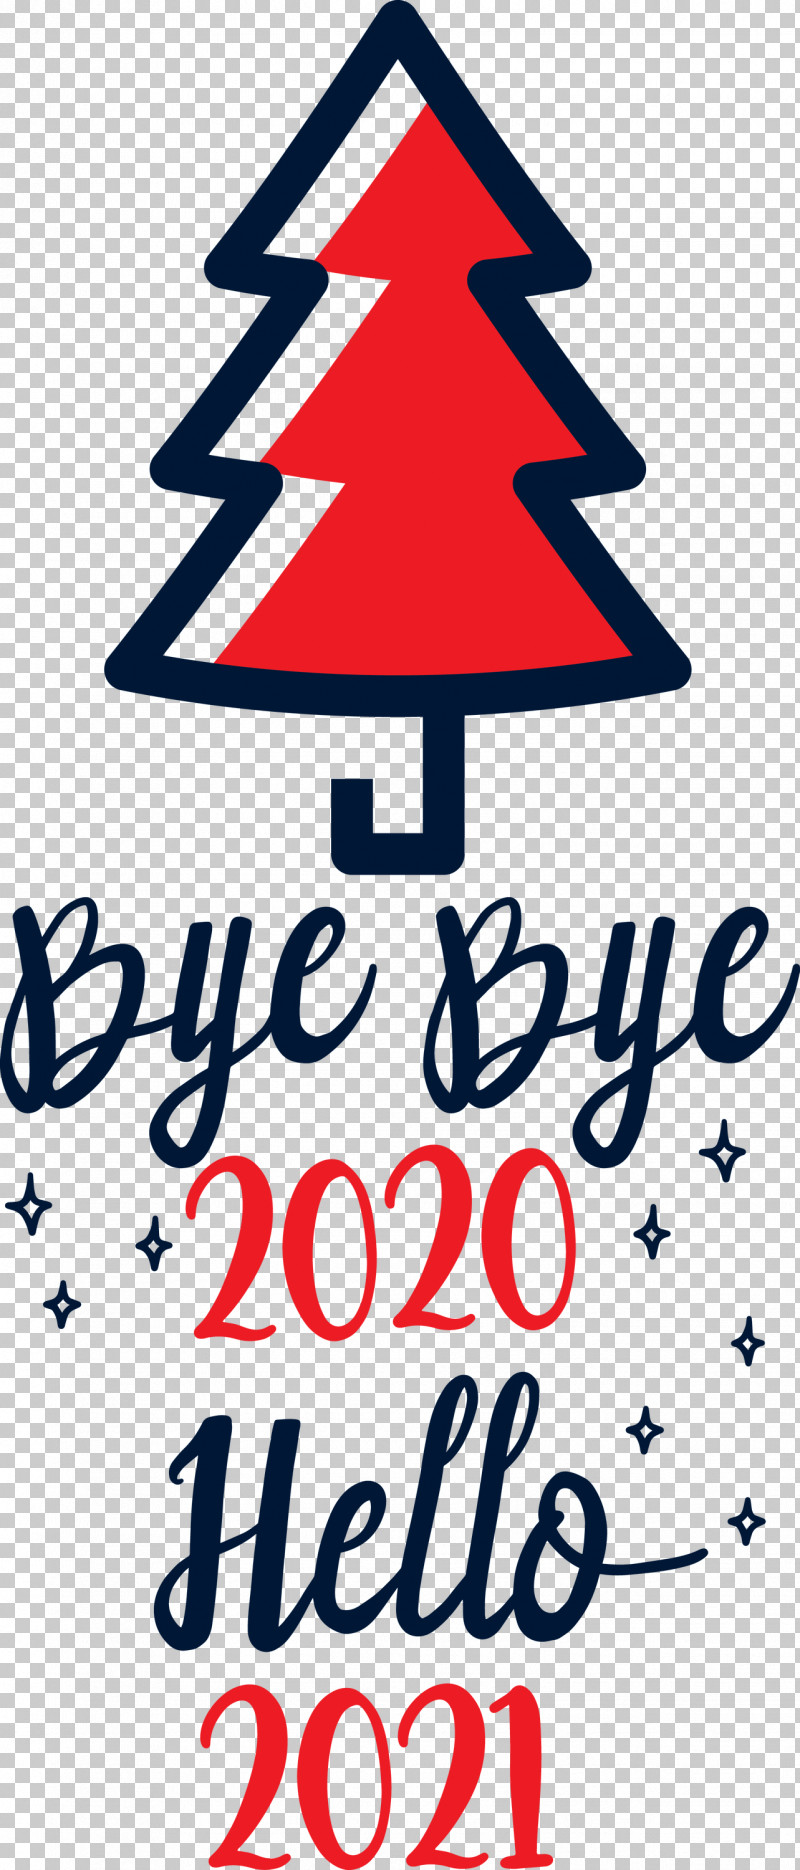 Hello 2021 Year Bye Bye 2020 Year PNG, Clipart, Abstract Art, Animation, Bye Bye 2020 Year, Christmas Day, Creativity Free PNG Download